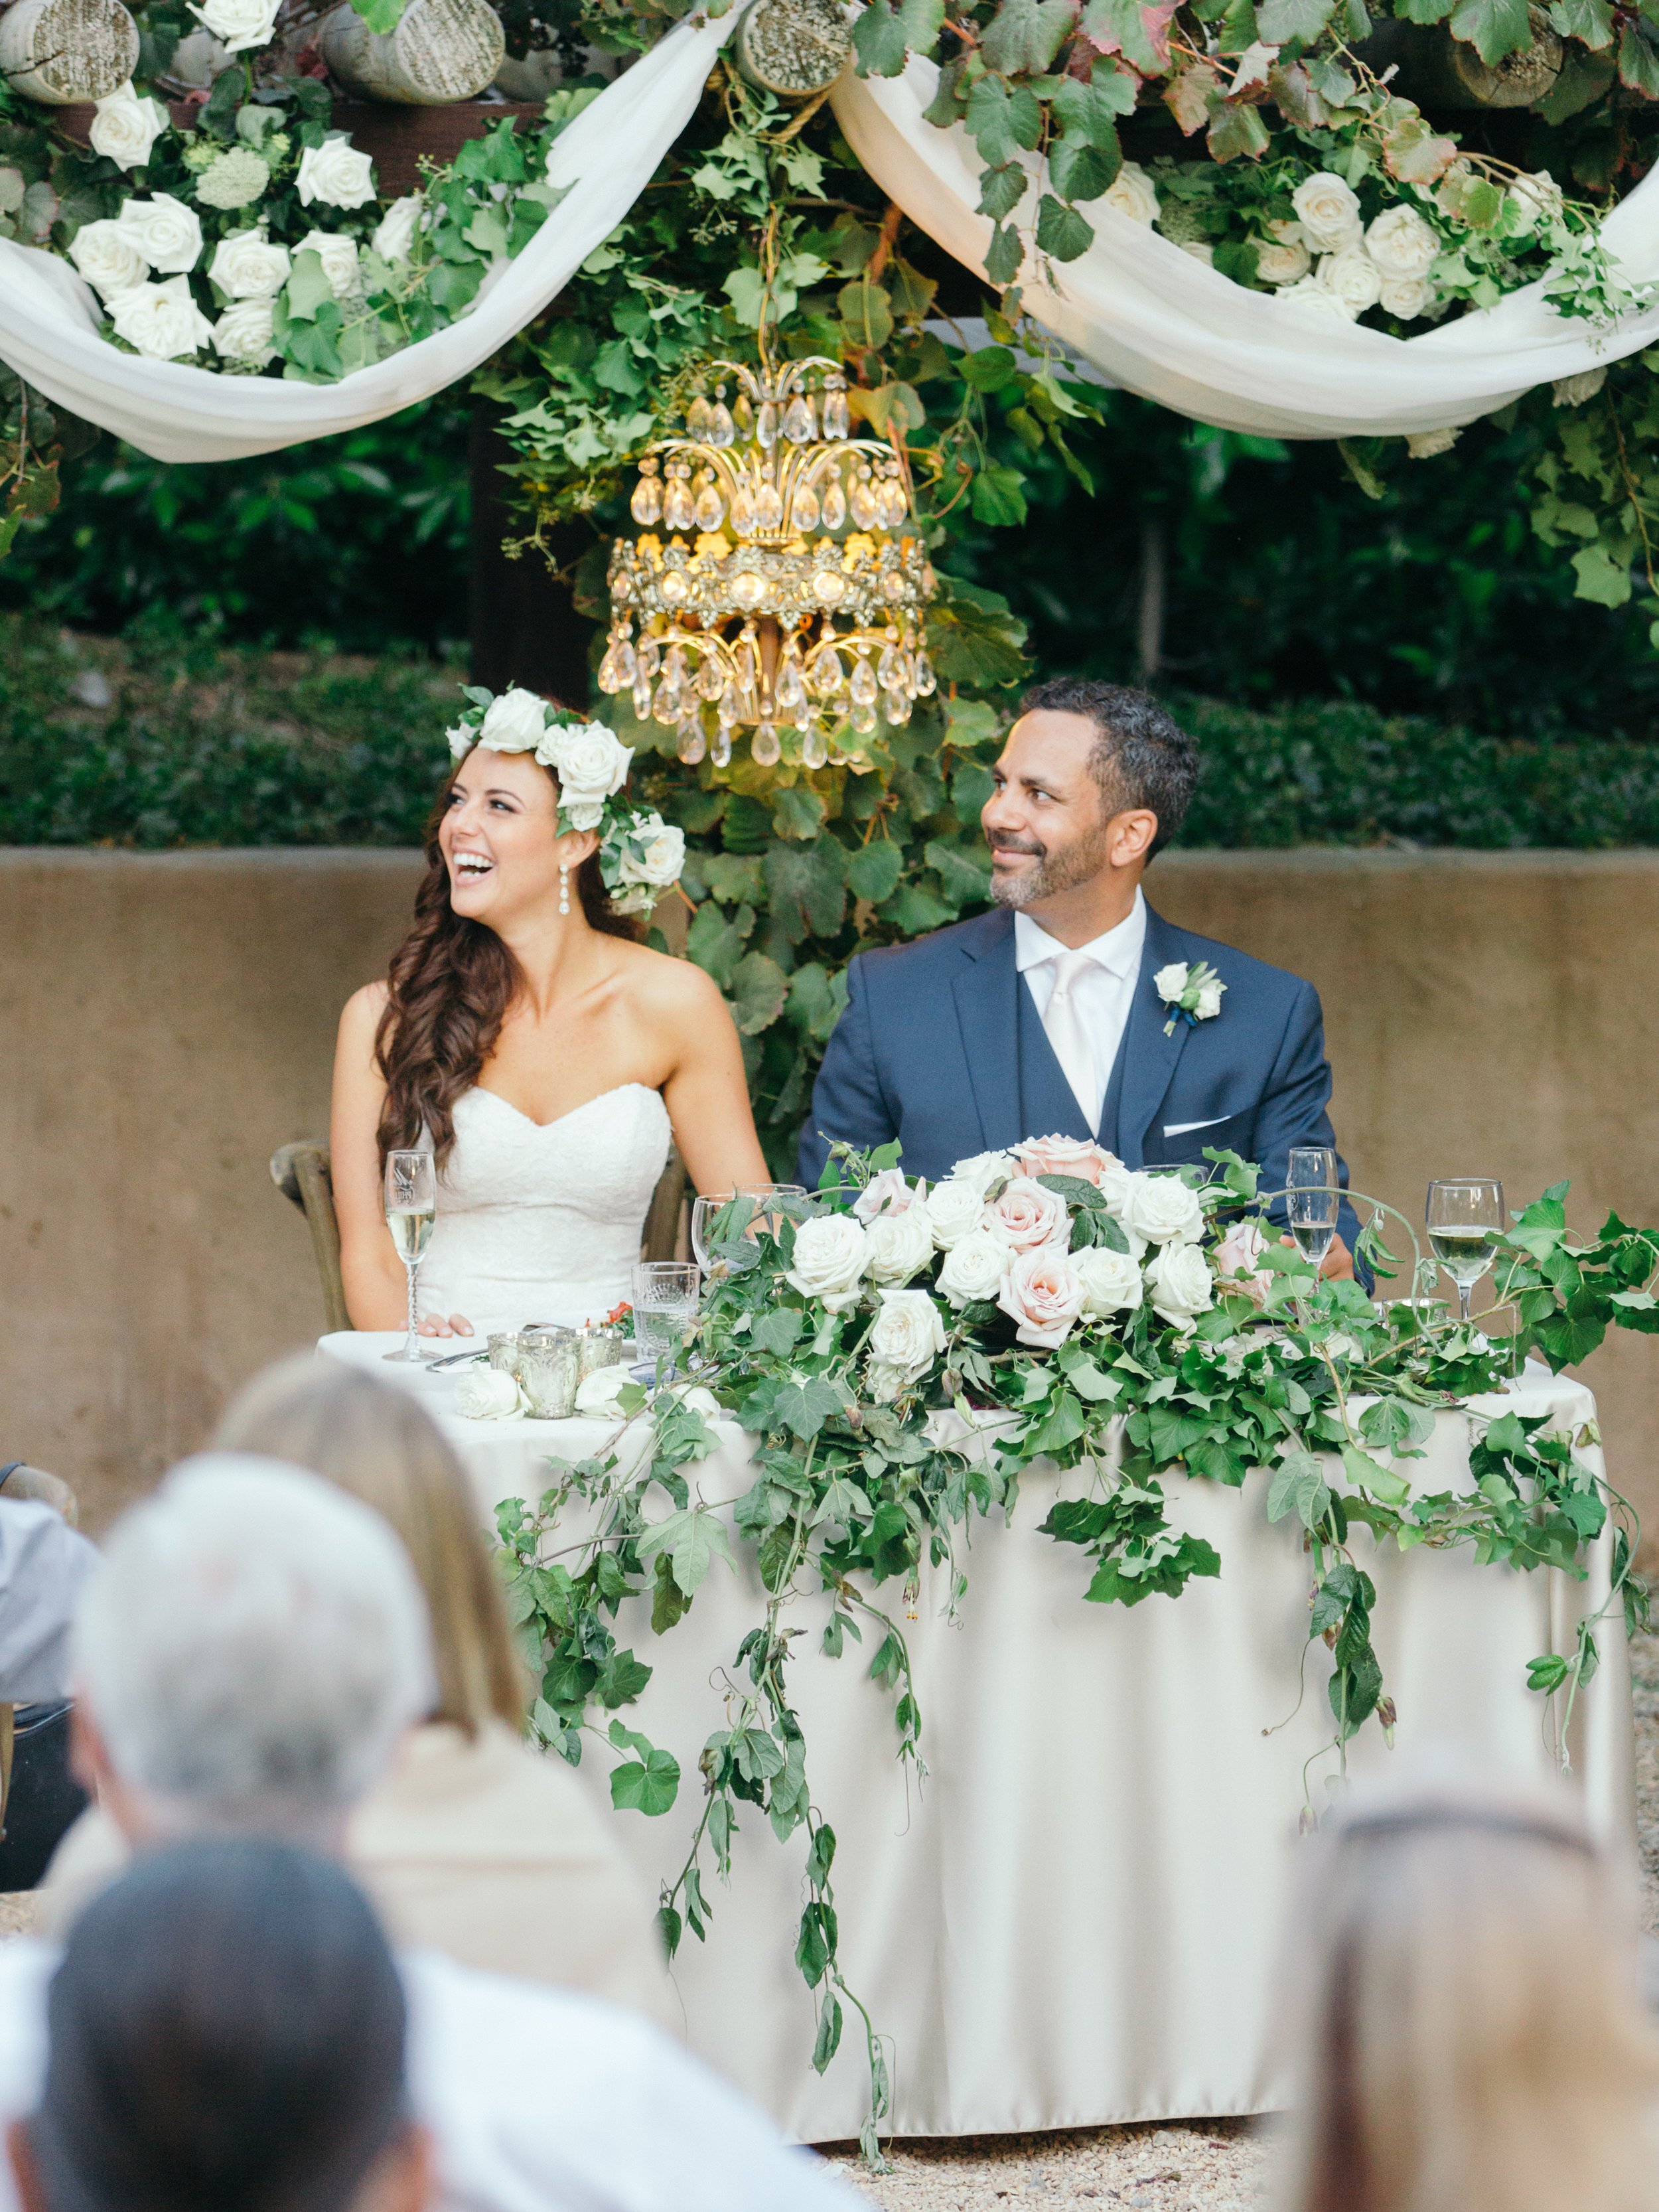 www.santabarbarawedding.com | Ella &amp; Louie | Kiel Rucker | White and Blush Flowers at the Bride and Groom’s Reception Table and a Flower Crown for the Bride